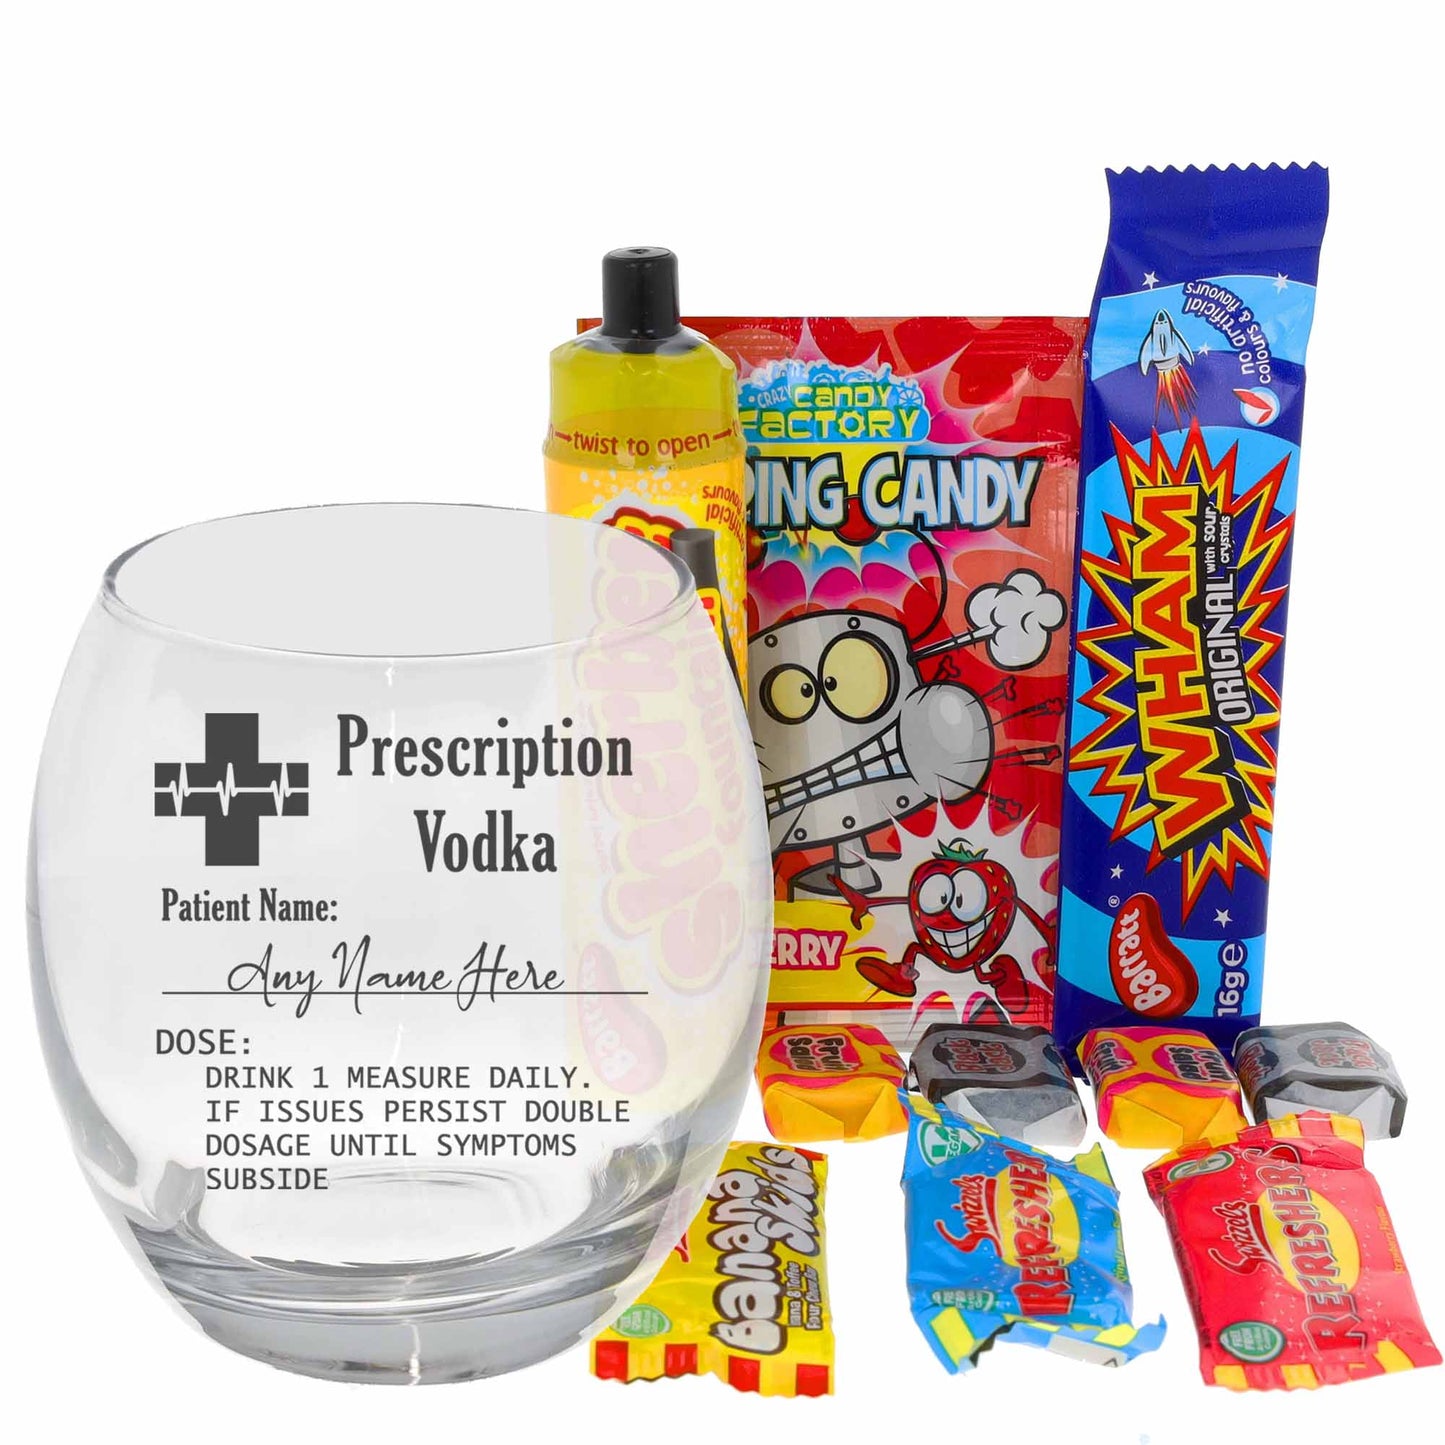 Personalised Engraved Prescription Vodka Glass with any Name  - Always Looking Good - Filled with Retro Sweets Small Tondo 